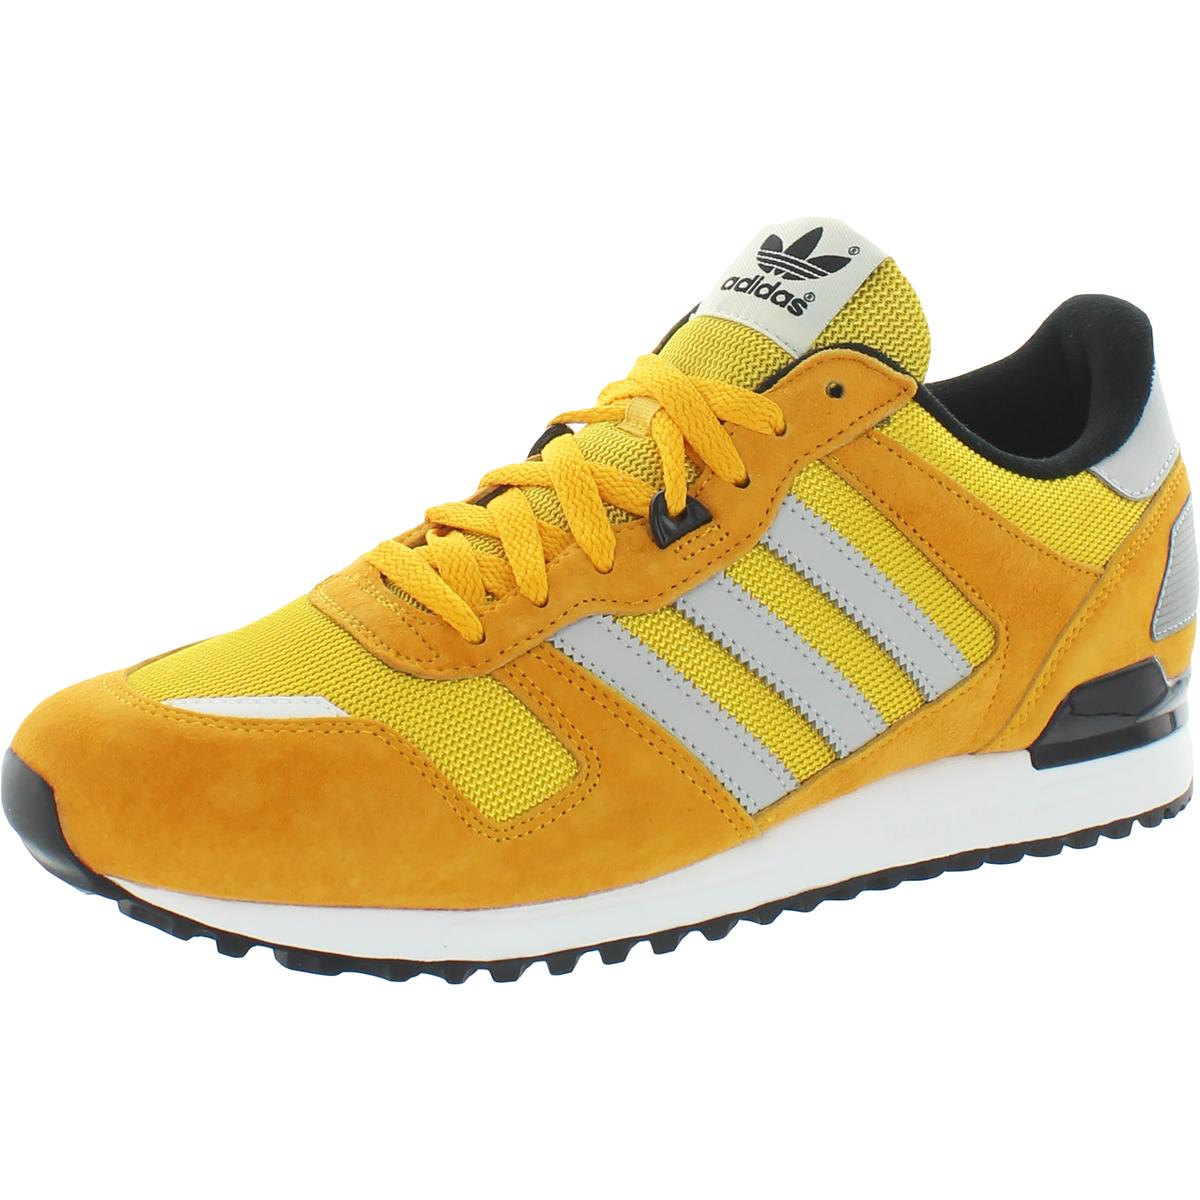 Zx 700 Mens Lifestyle Lace-Up Fashion Sneakers